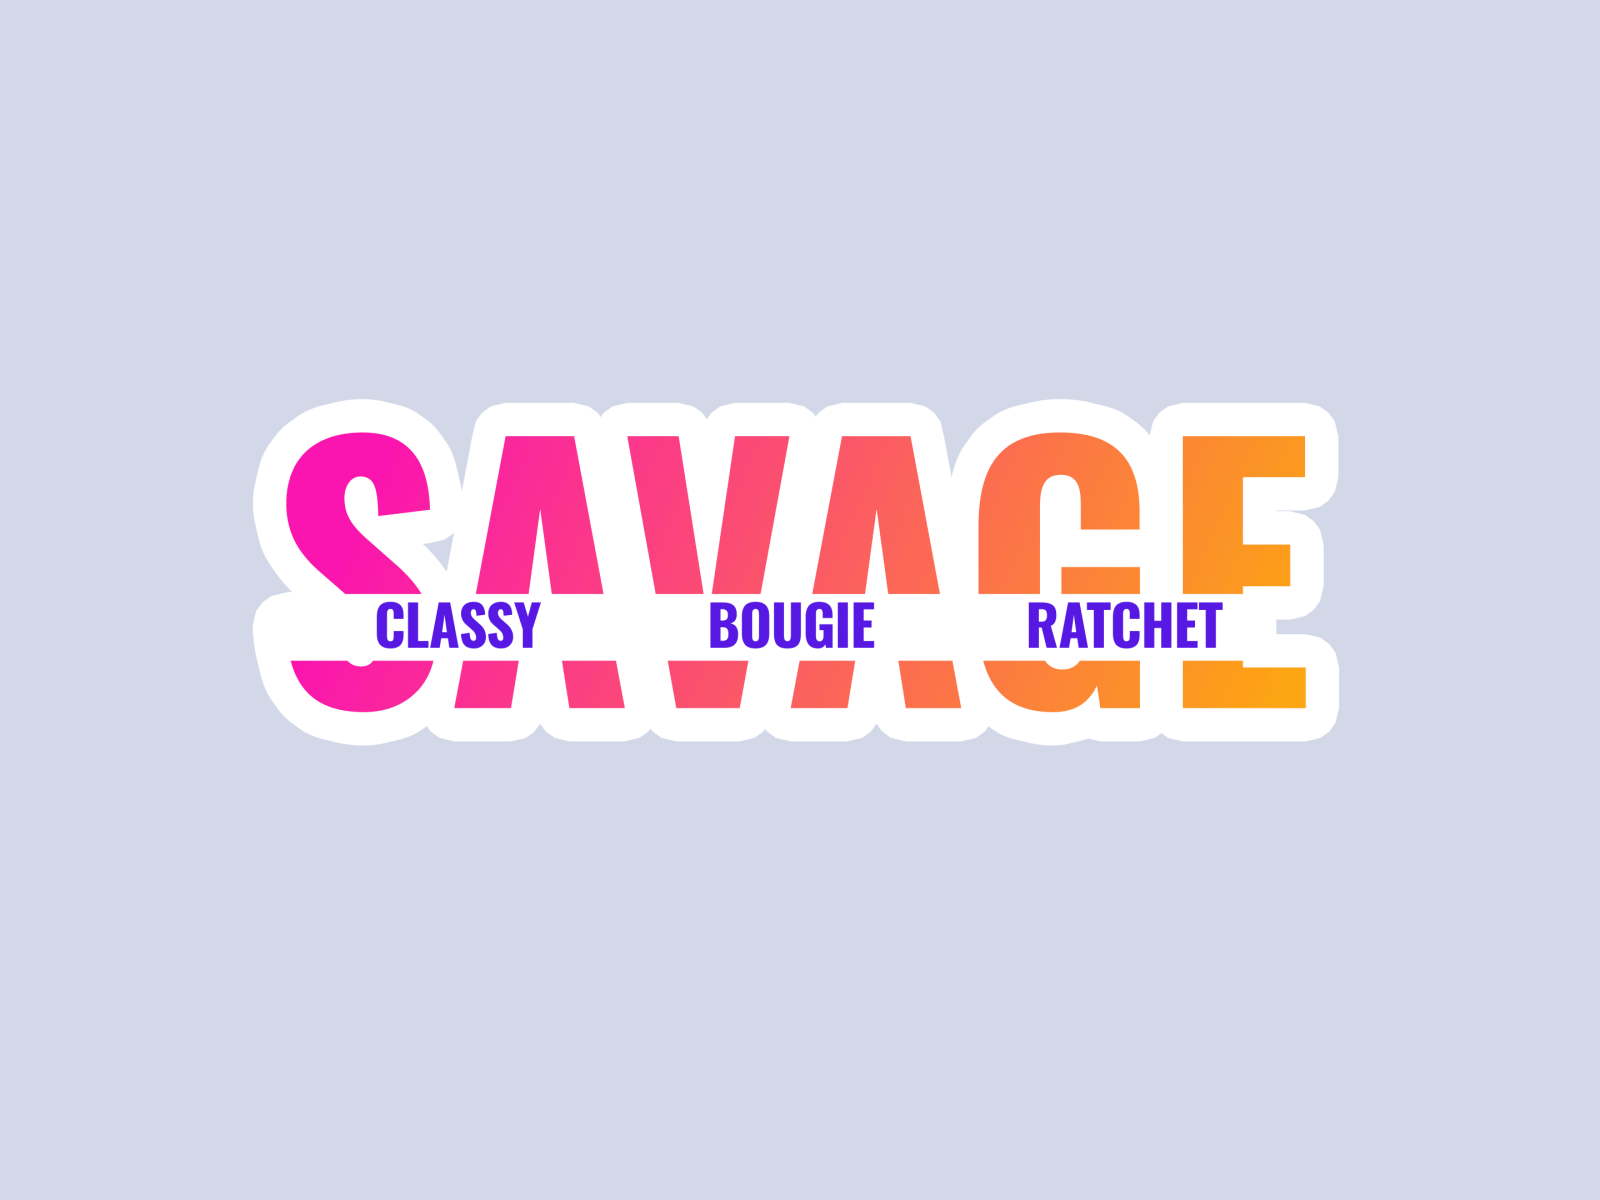 Savage after effects animation bougie classy ratchet savage sticker titles typography